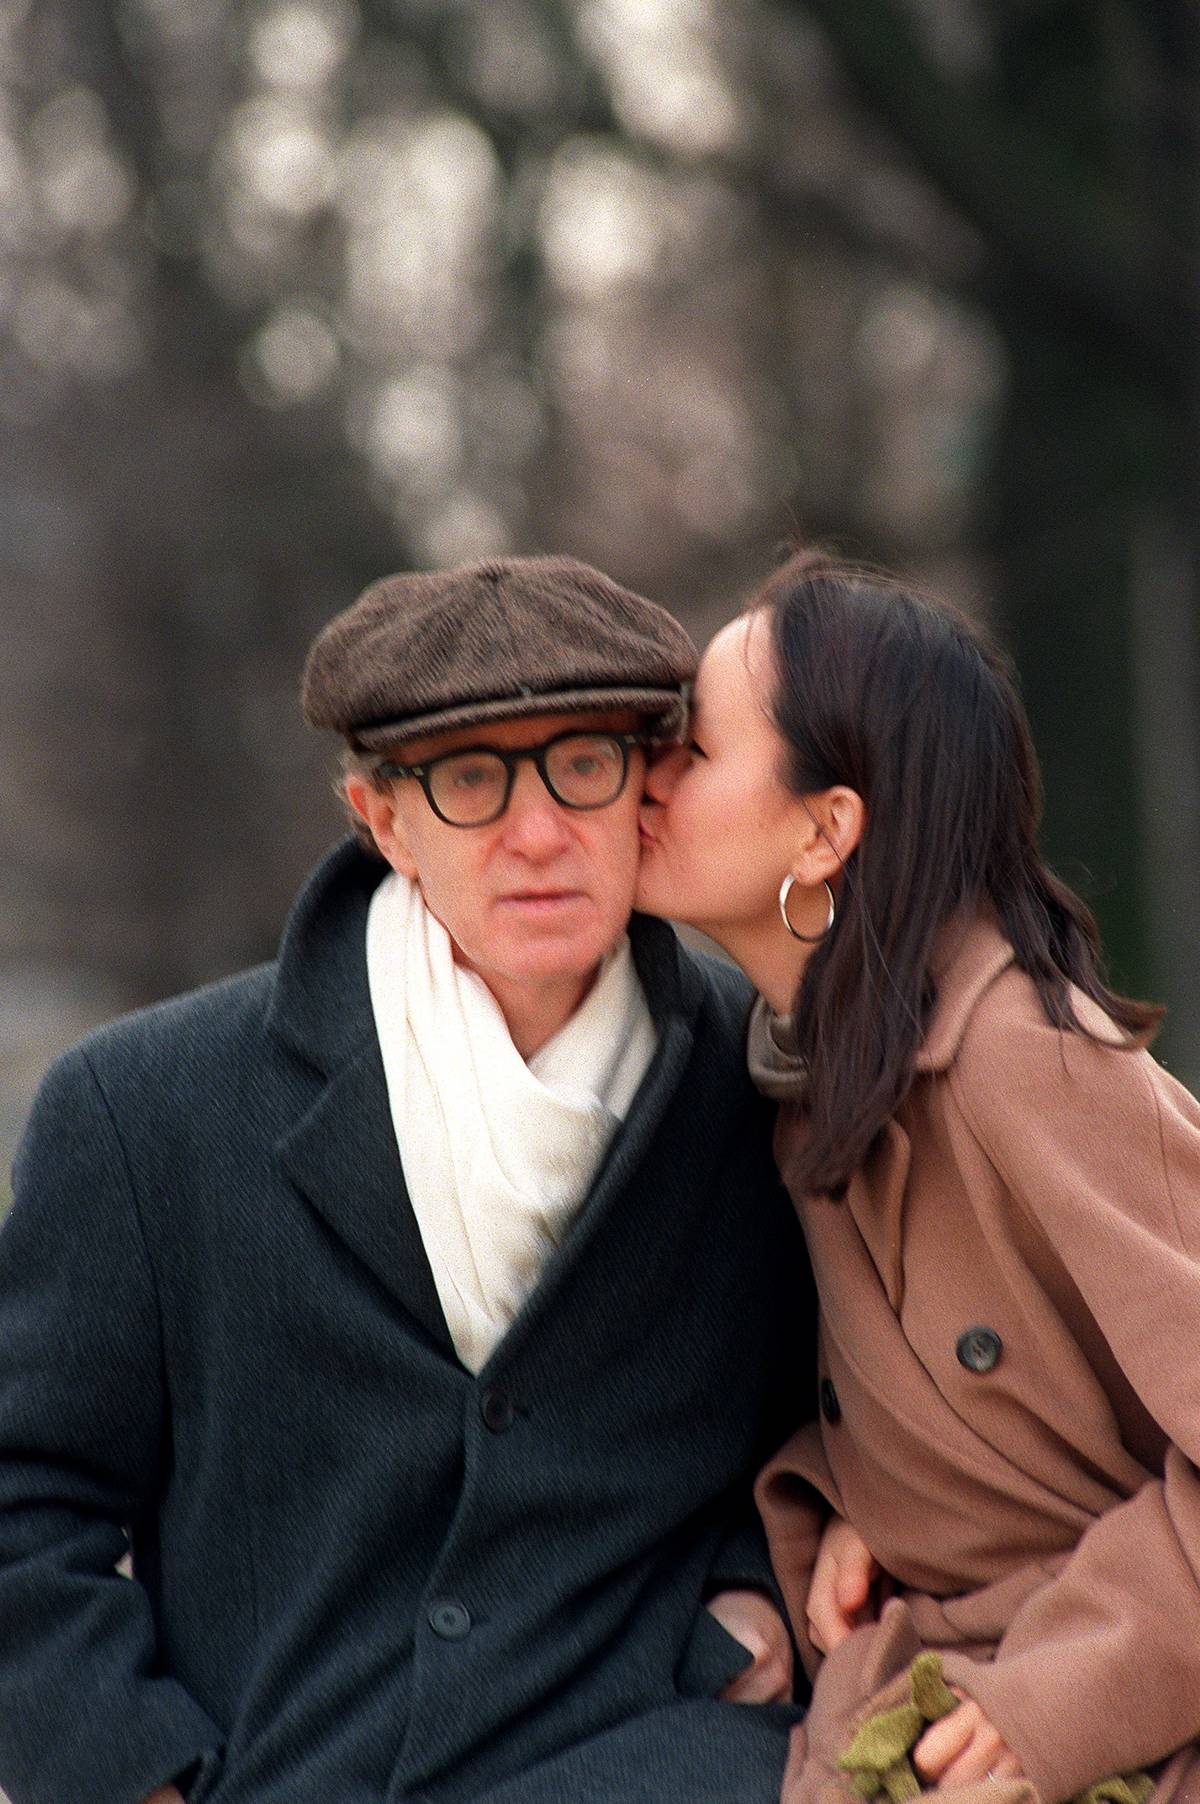 Soon-Yi Previn, wife of American actor and director Woody Allen (L), kisses her husband, 26 December 1997 in the Tuileries Gardens in Paris. (Photo credit Jack Guez/AFP/Getty Images)